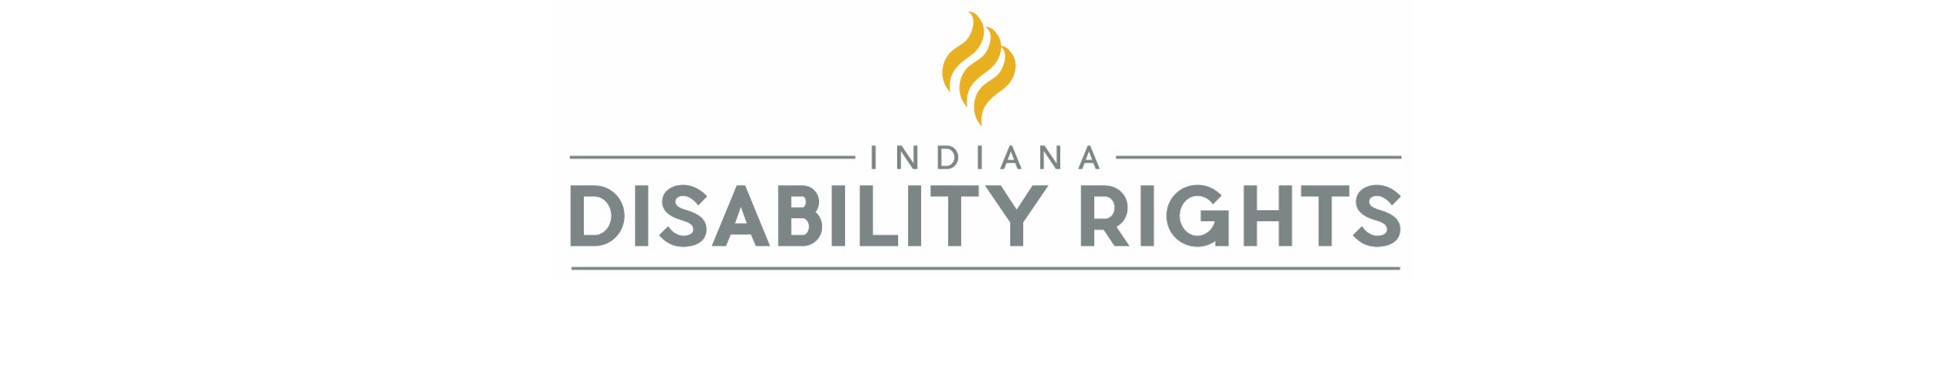 Indiana Disability Rights Logo - gold flame over the words Indiana Disability Rights in gray lettering